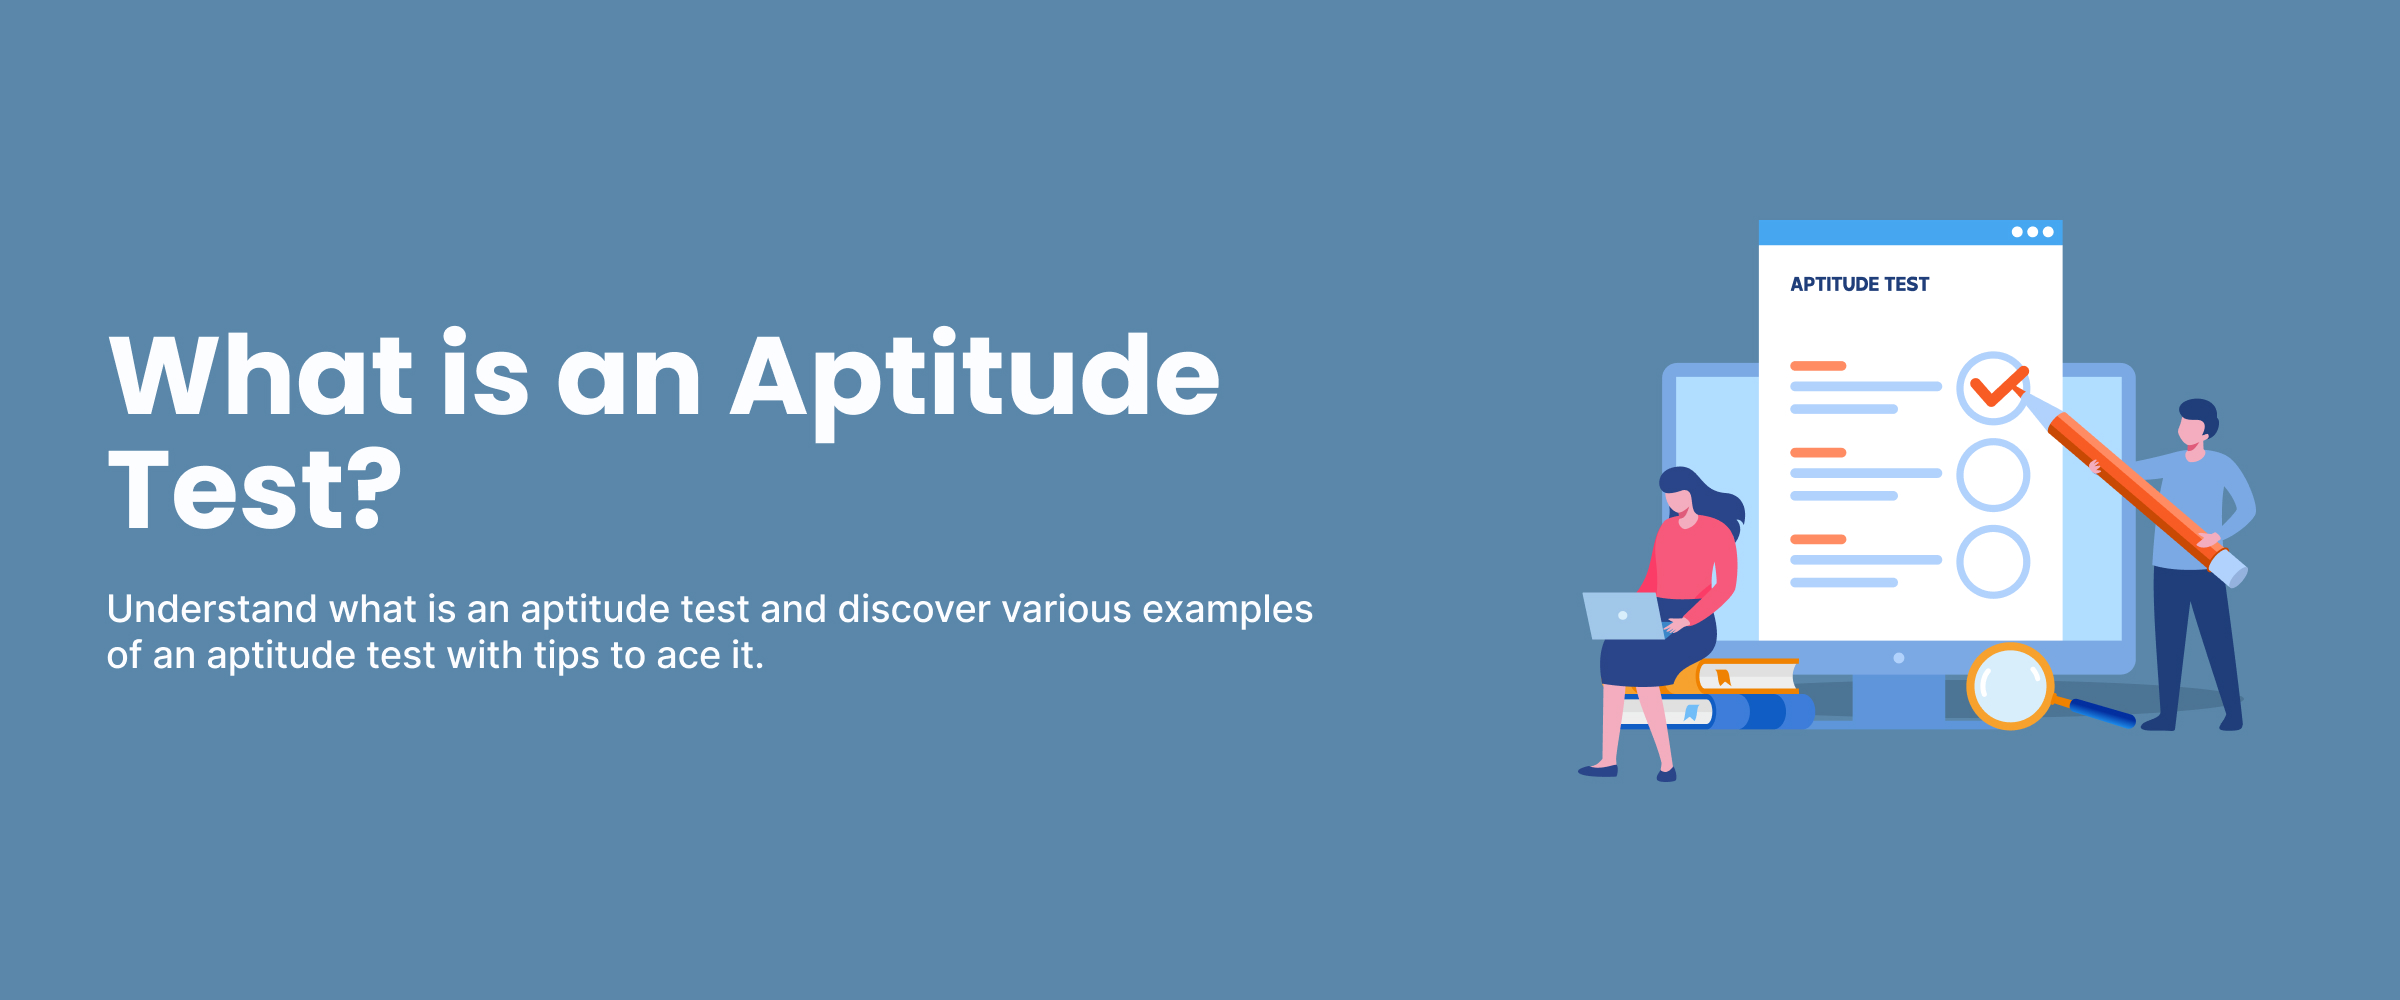 What is an Aptitude Test